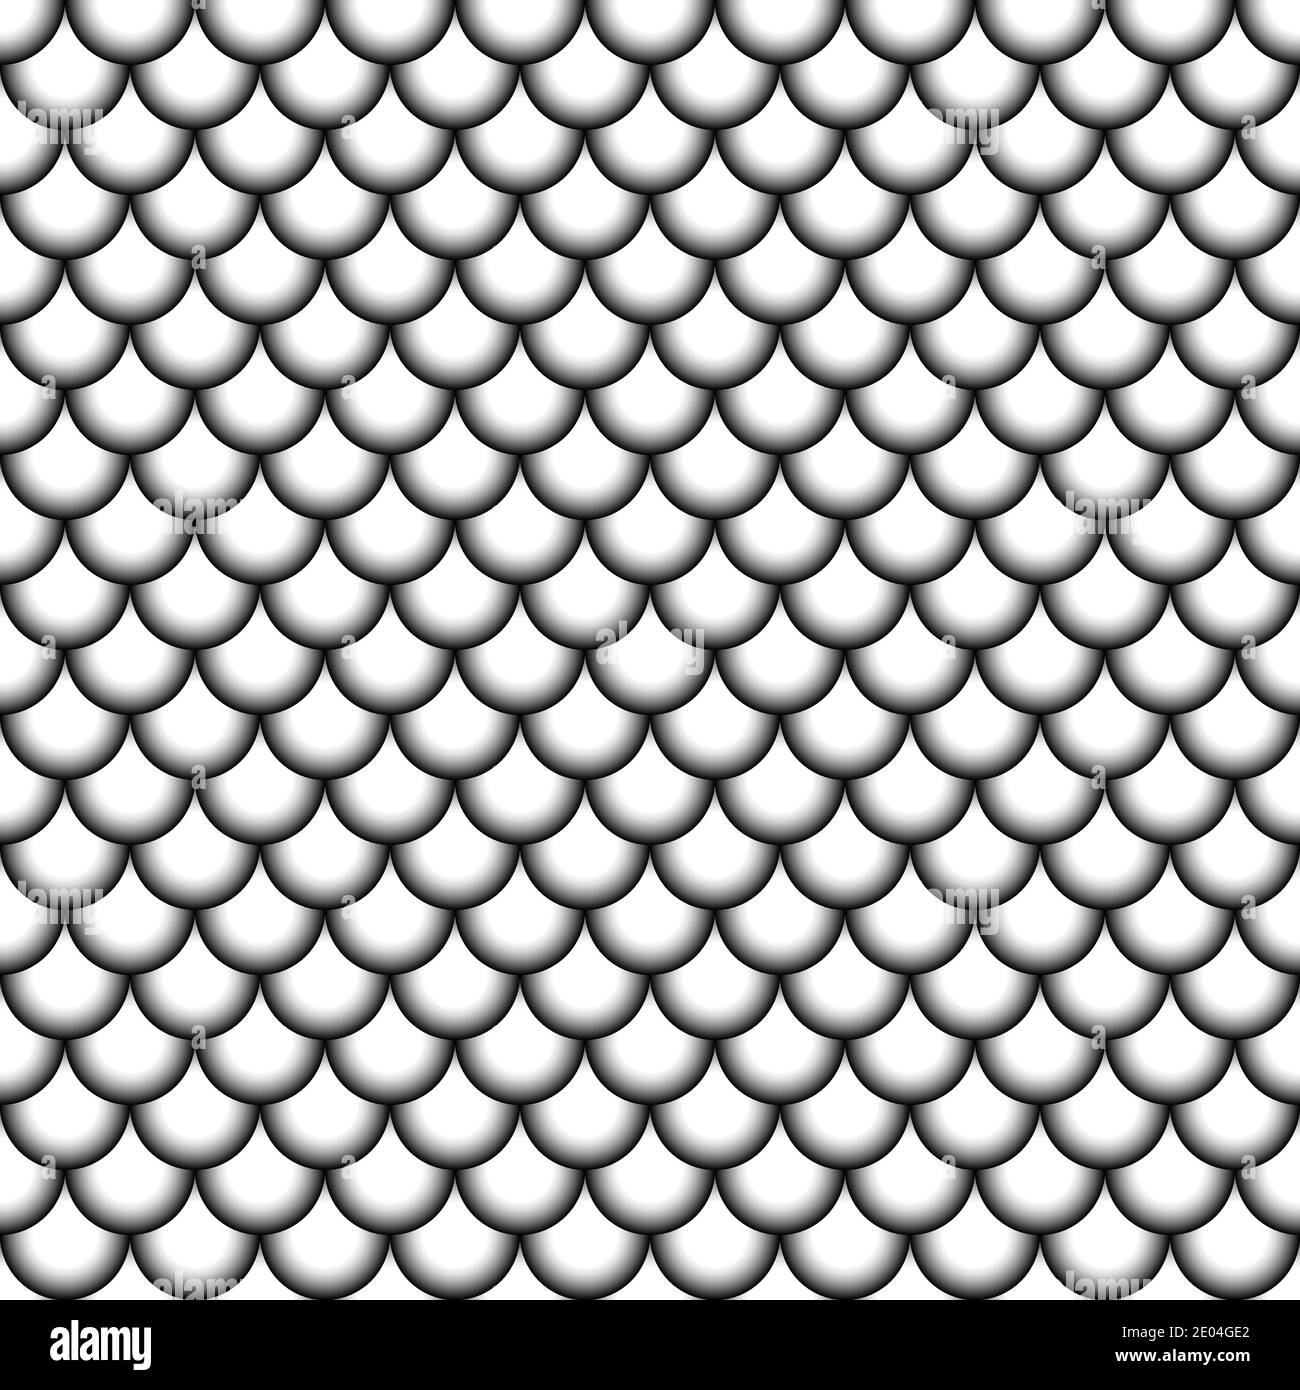 seamless pattern fish scales Asian style vector background seamless circles with black and white gradient, fish scales Stock Vector